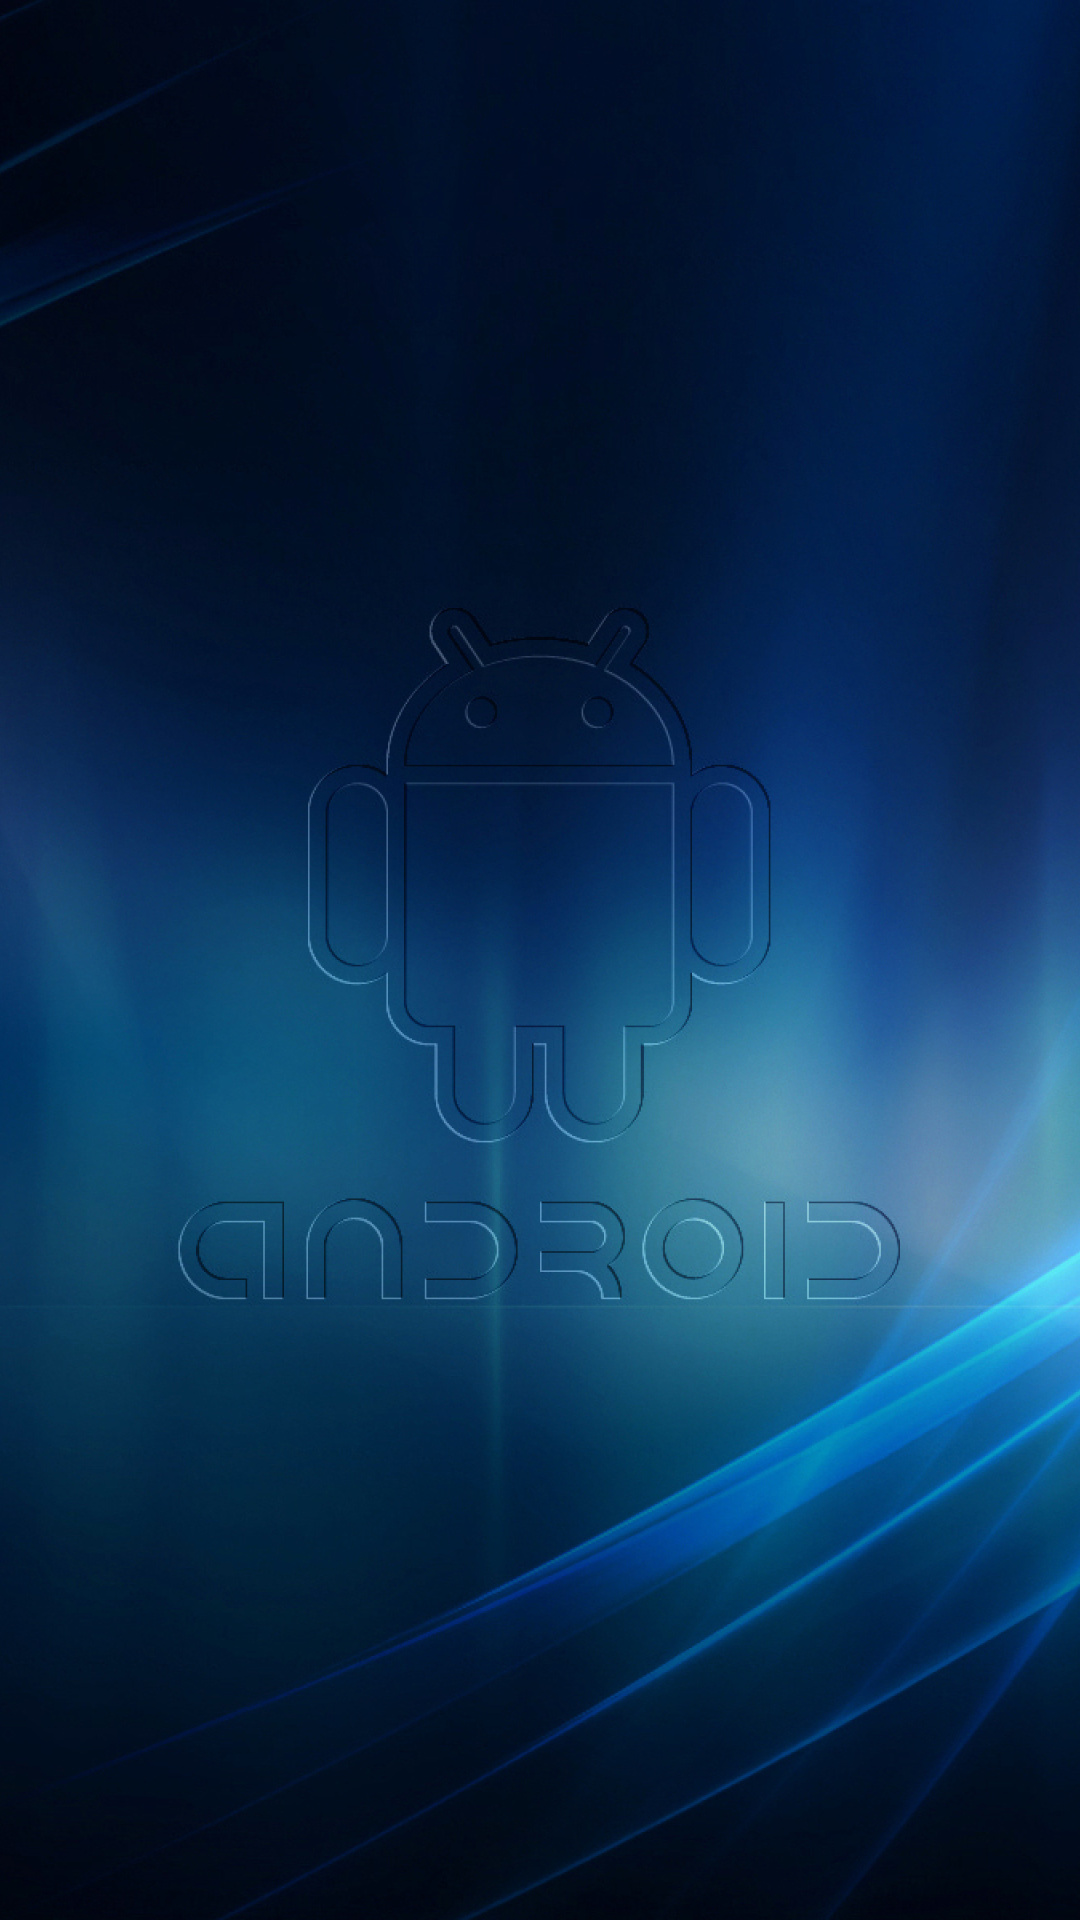 Android Robot wallpaper 1080x1920